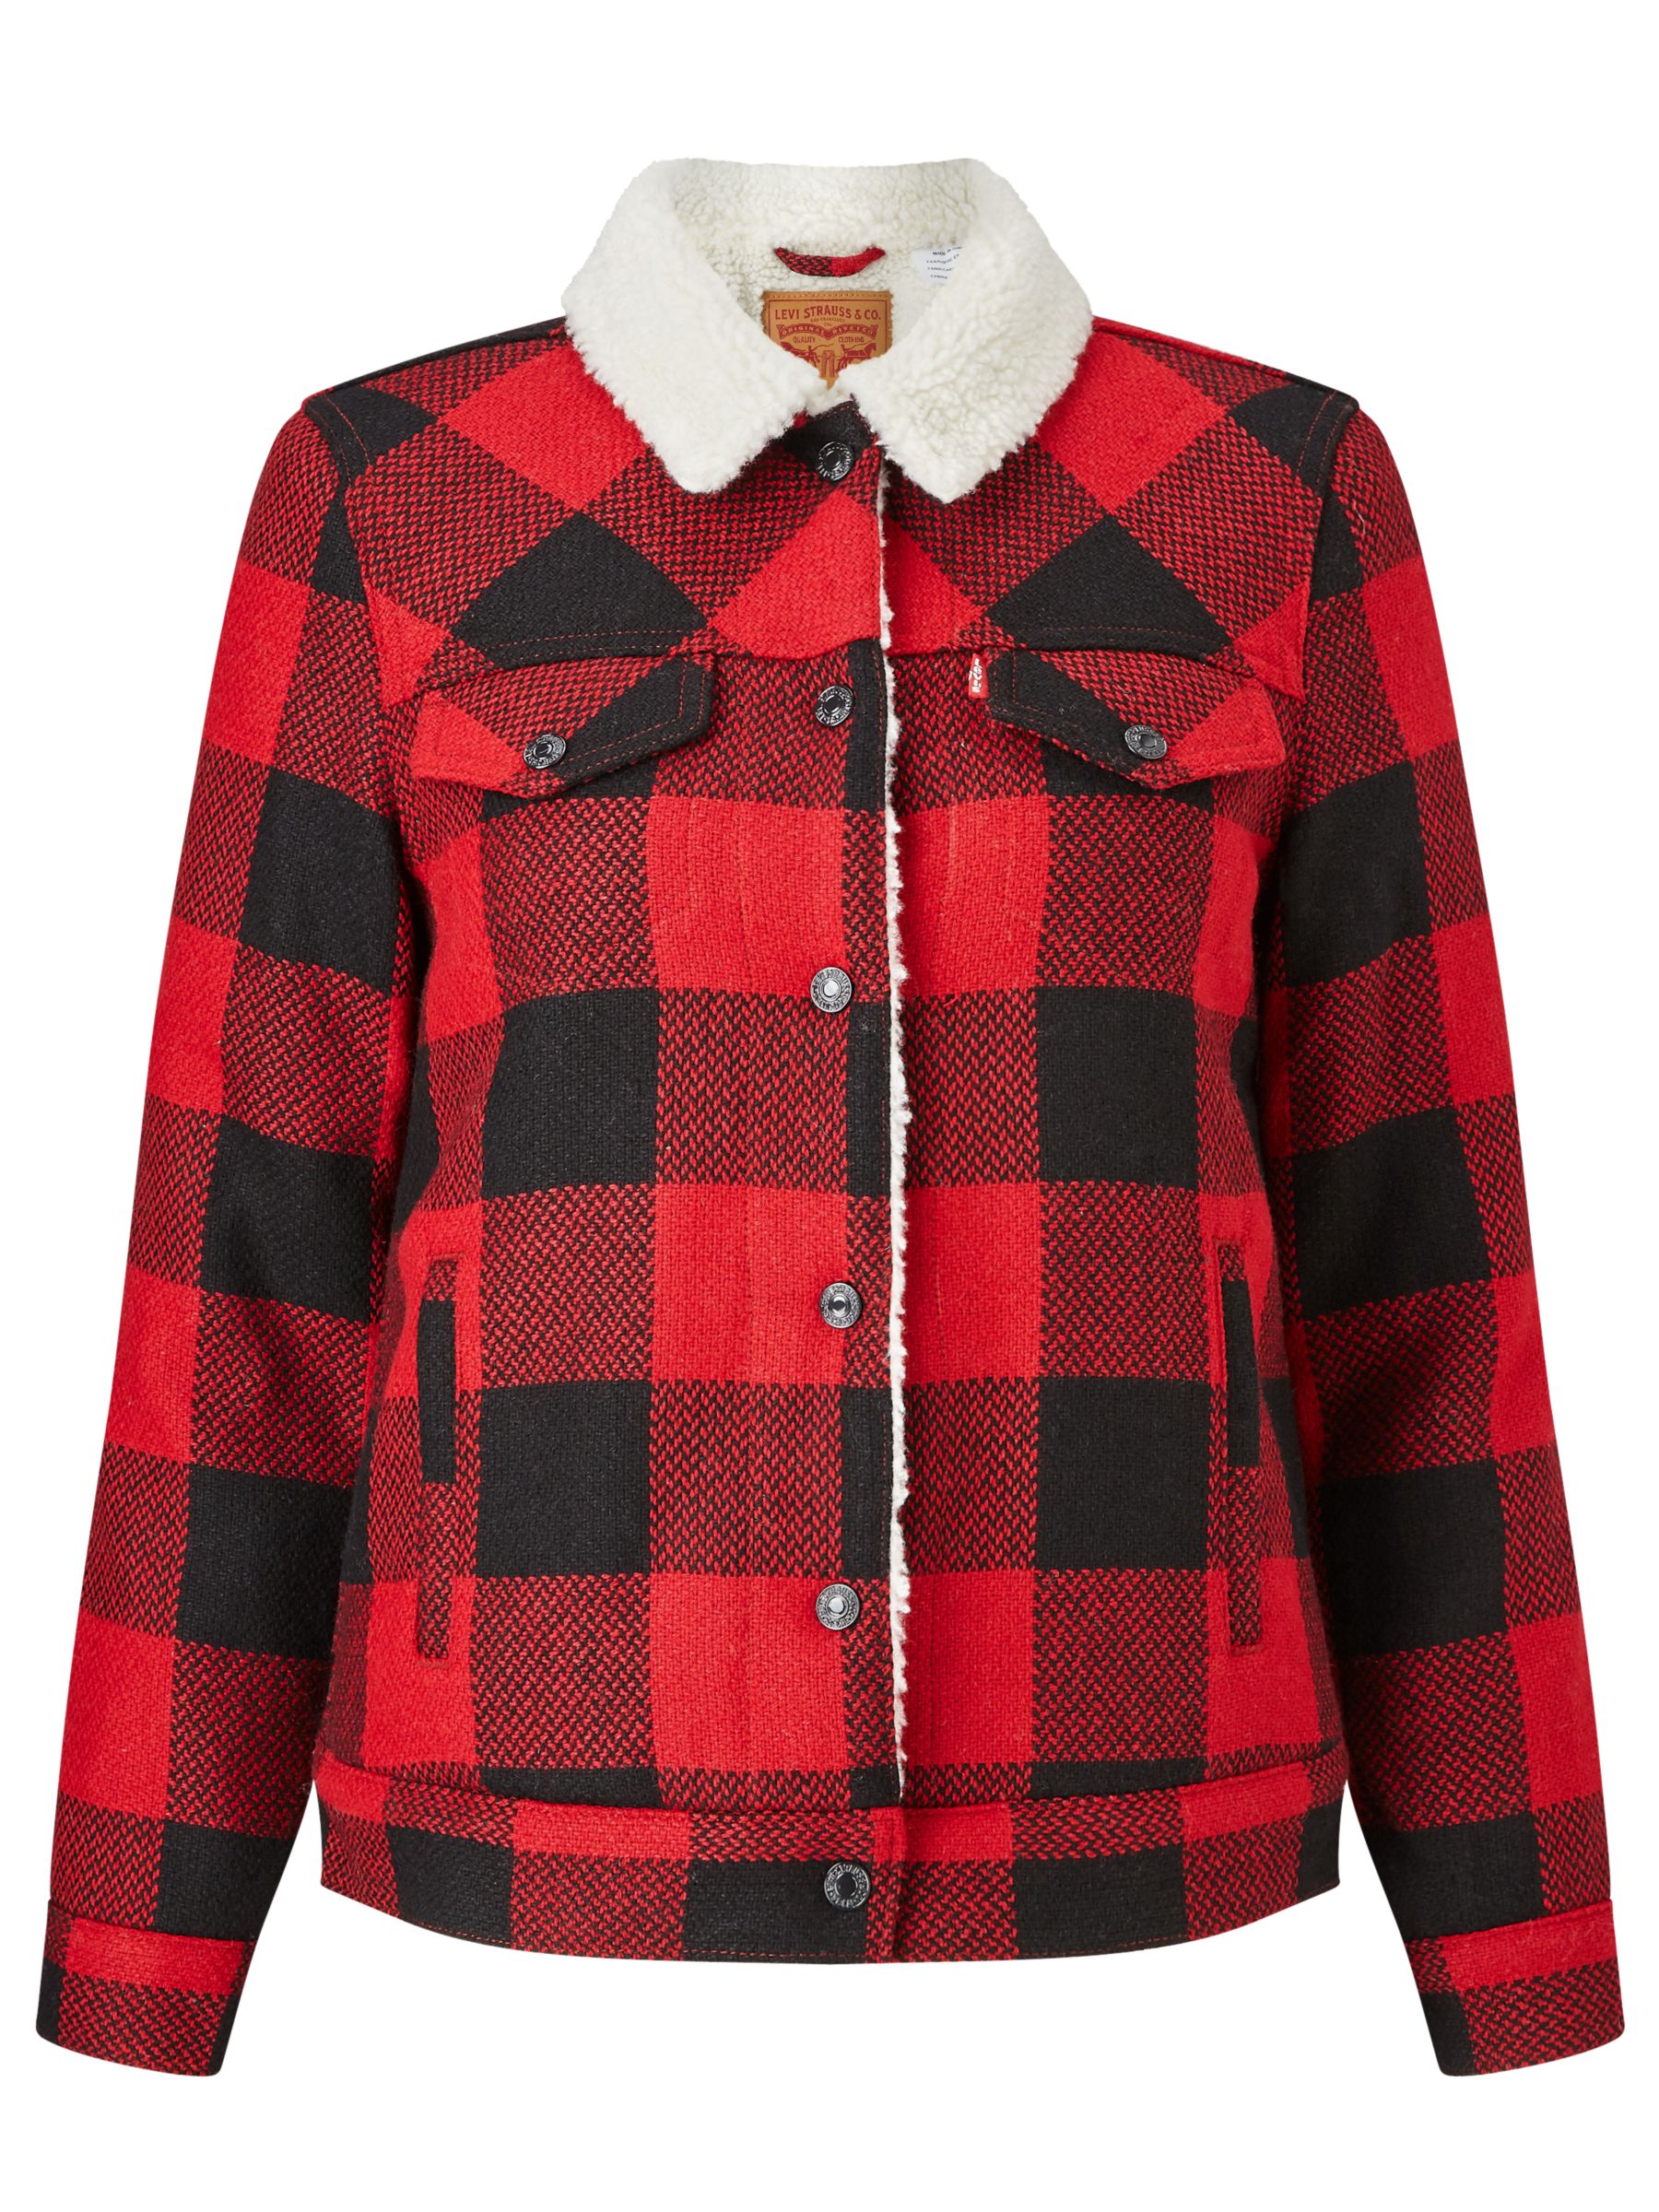 levis sherpa jacket red plaid